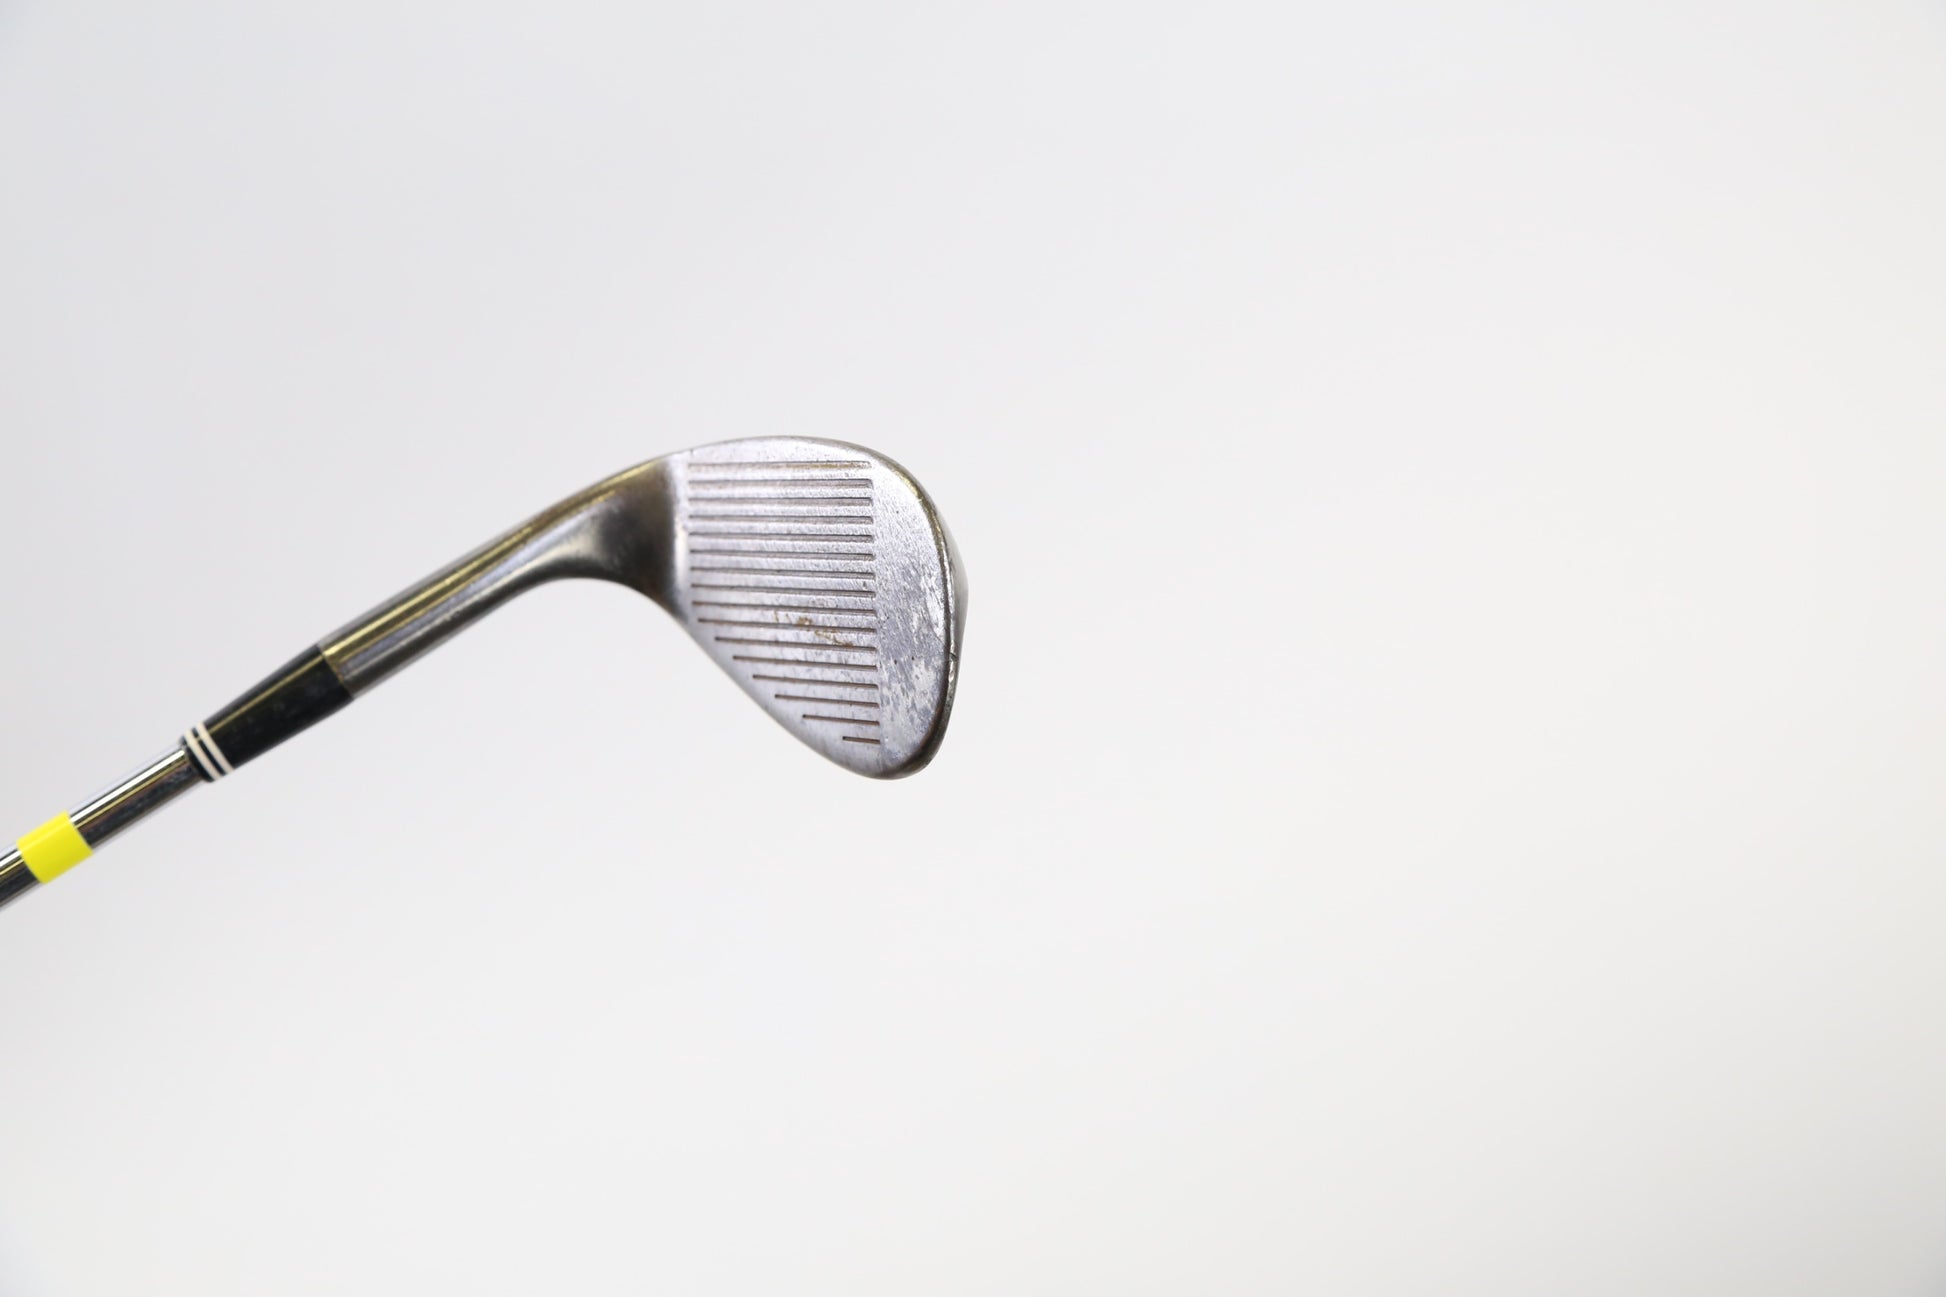 Used Cleveland 588 Tour Action Sand Wedge - Right-Handed - 57 Degrees - Stiff Flex-Next Round